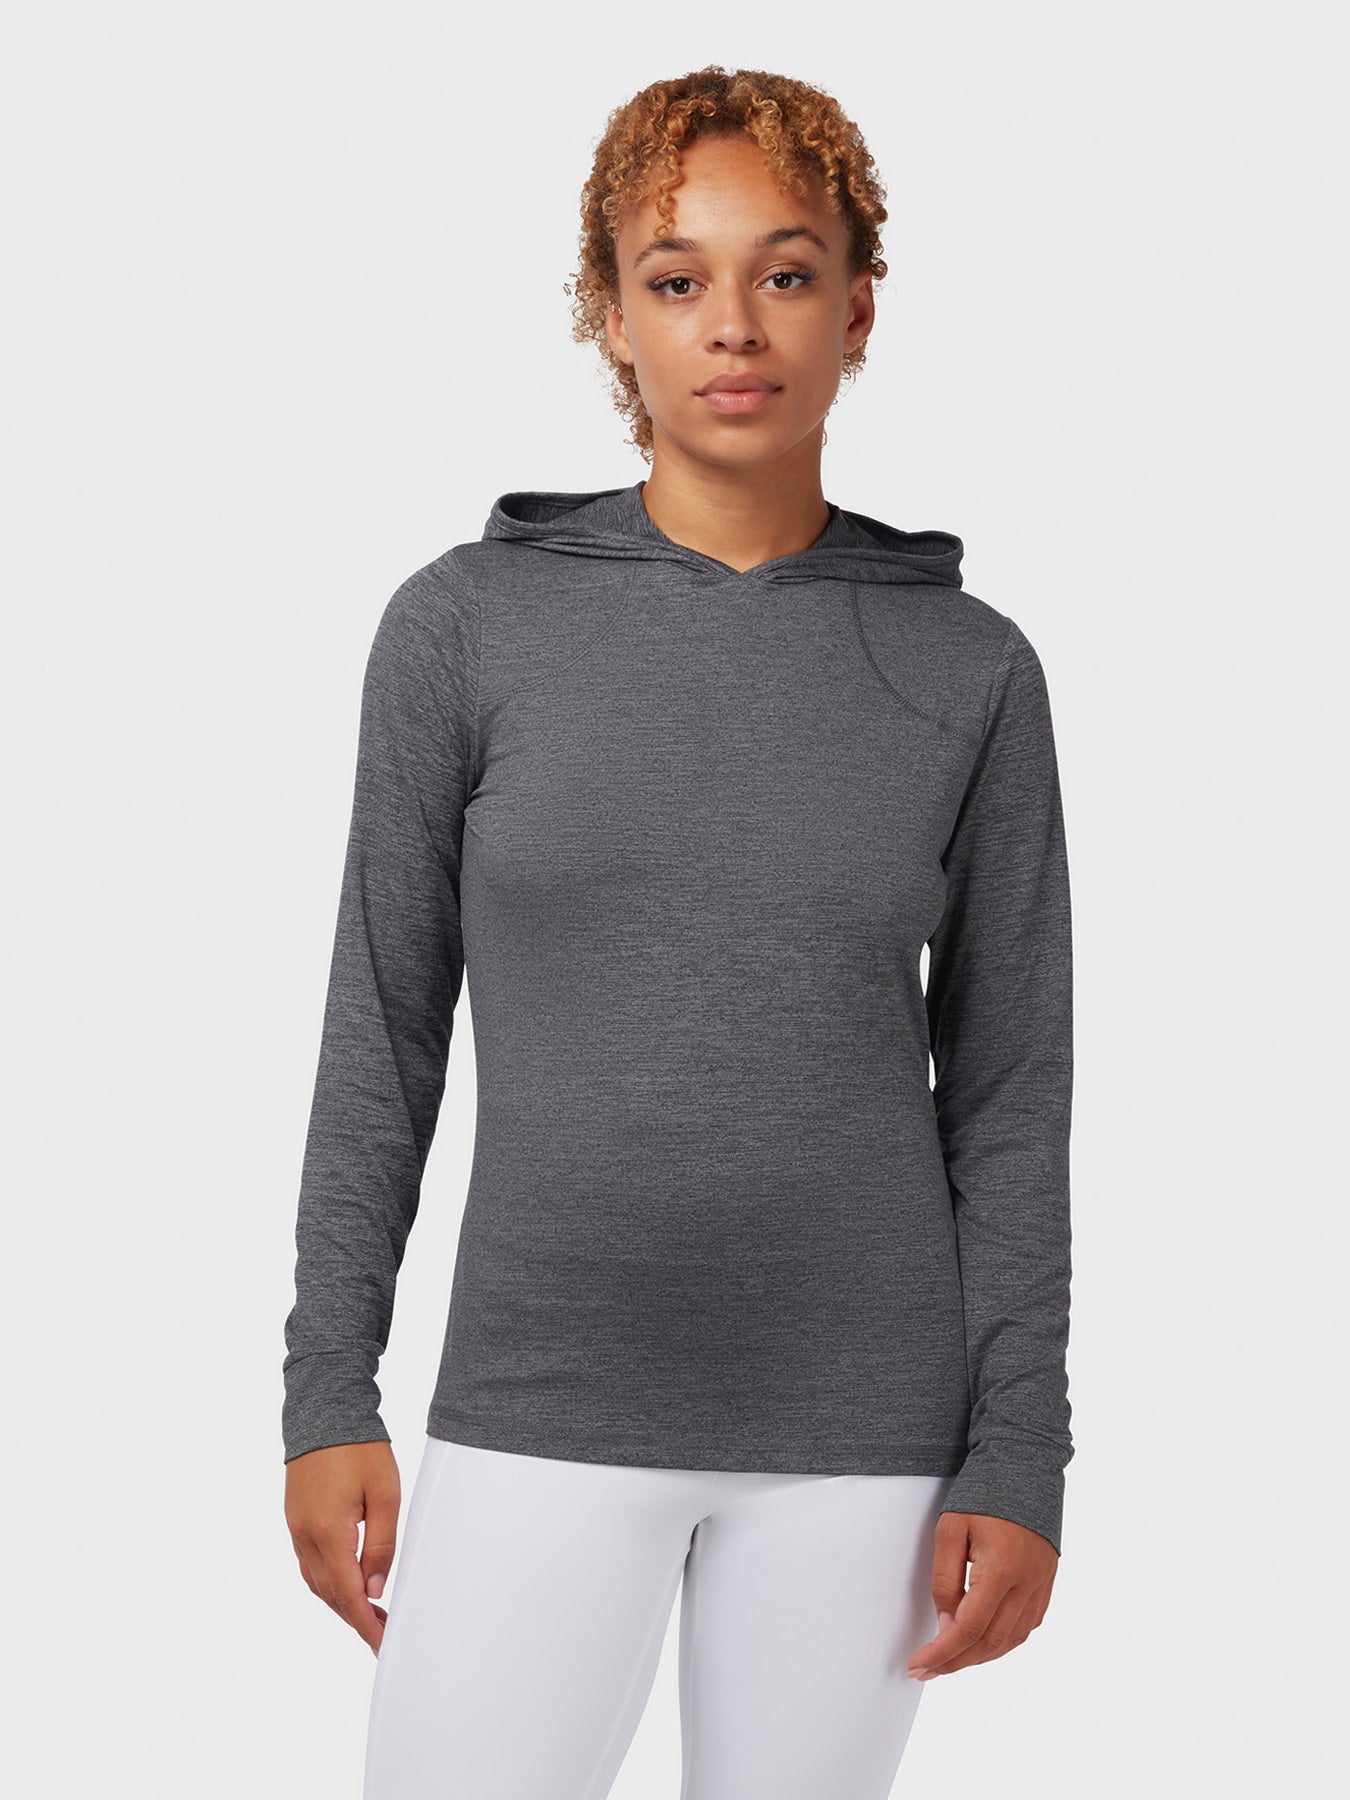 View Brushed Heather Womens Hoodie In Black Heather Black Heather XS information